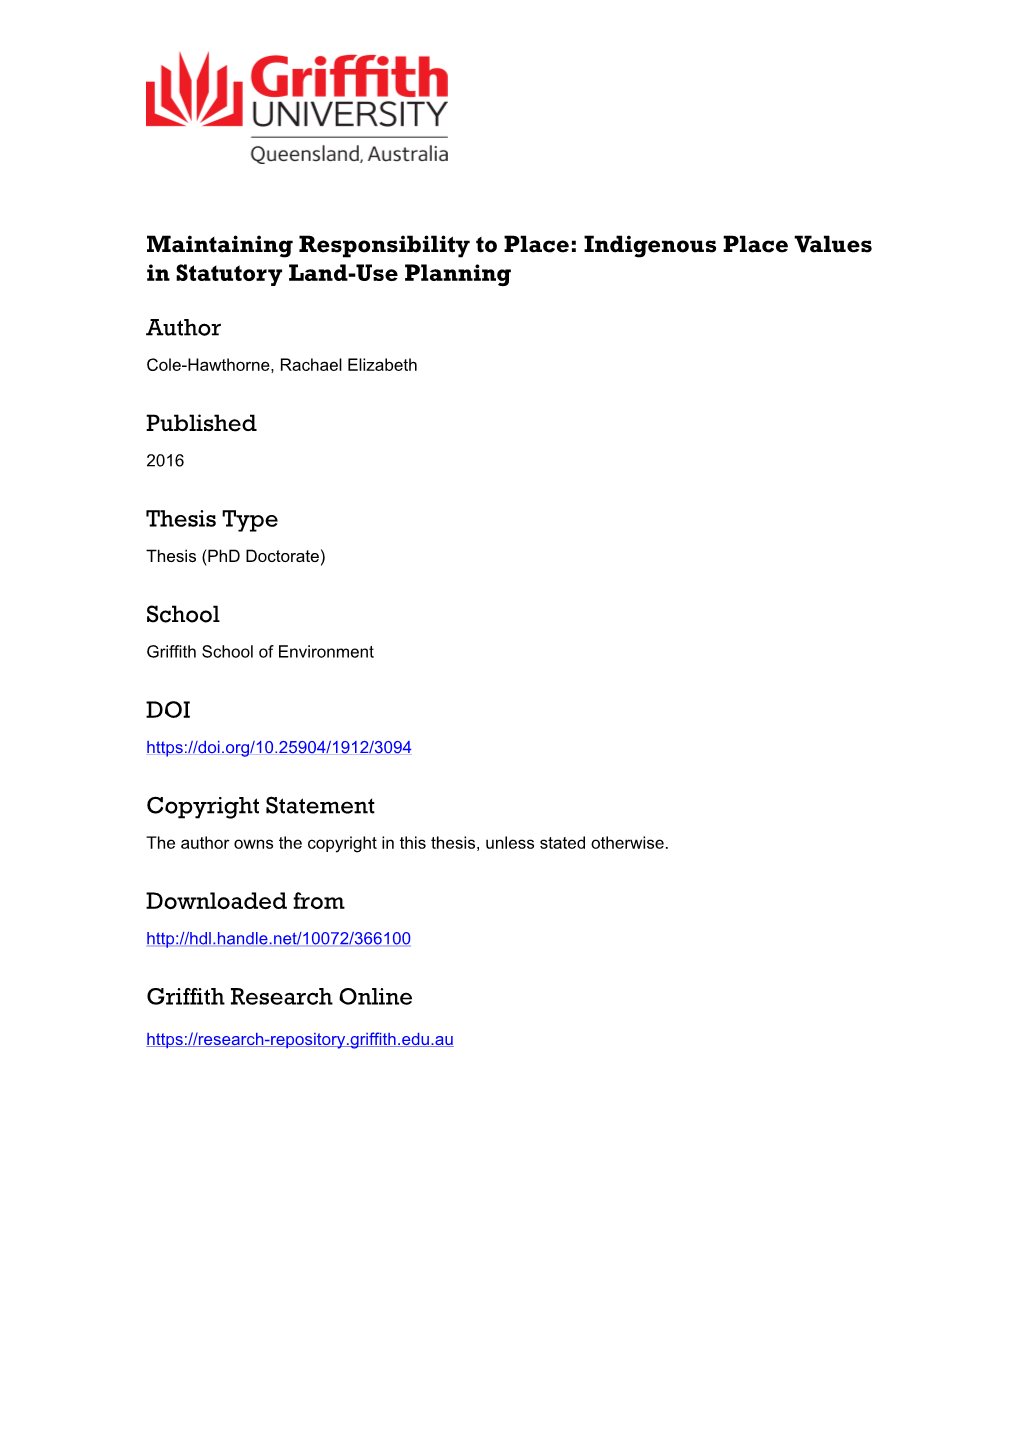 Maintaining Responsibility to Place: Indigenous Place Values in Statutory Land-Use Planning